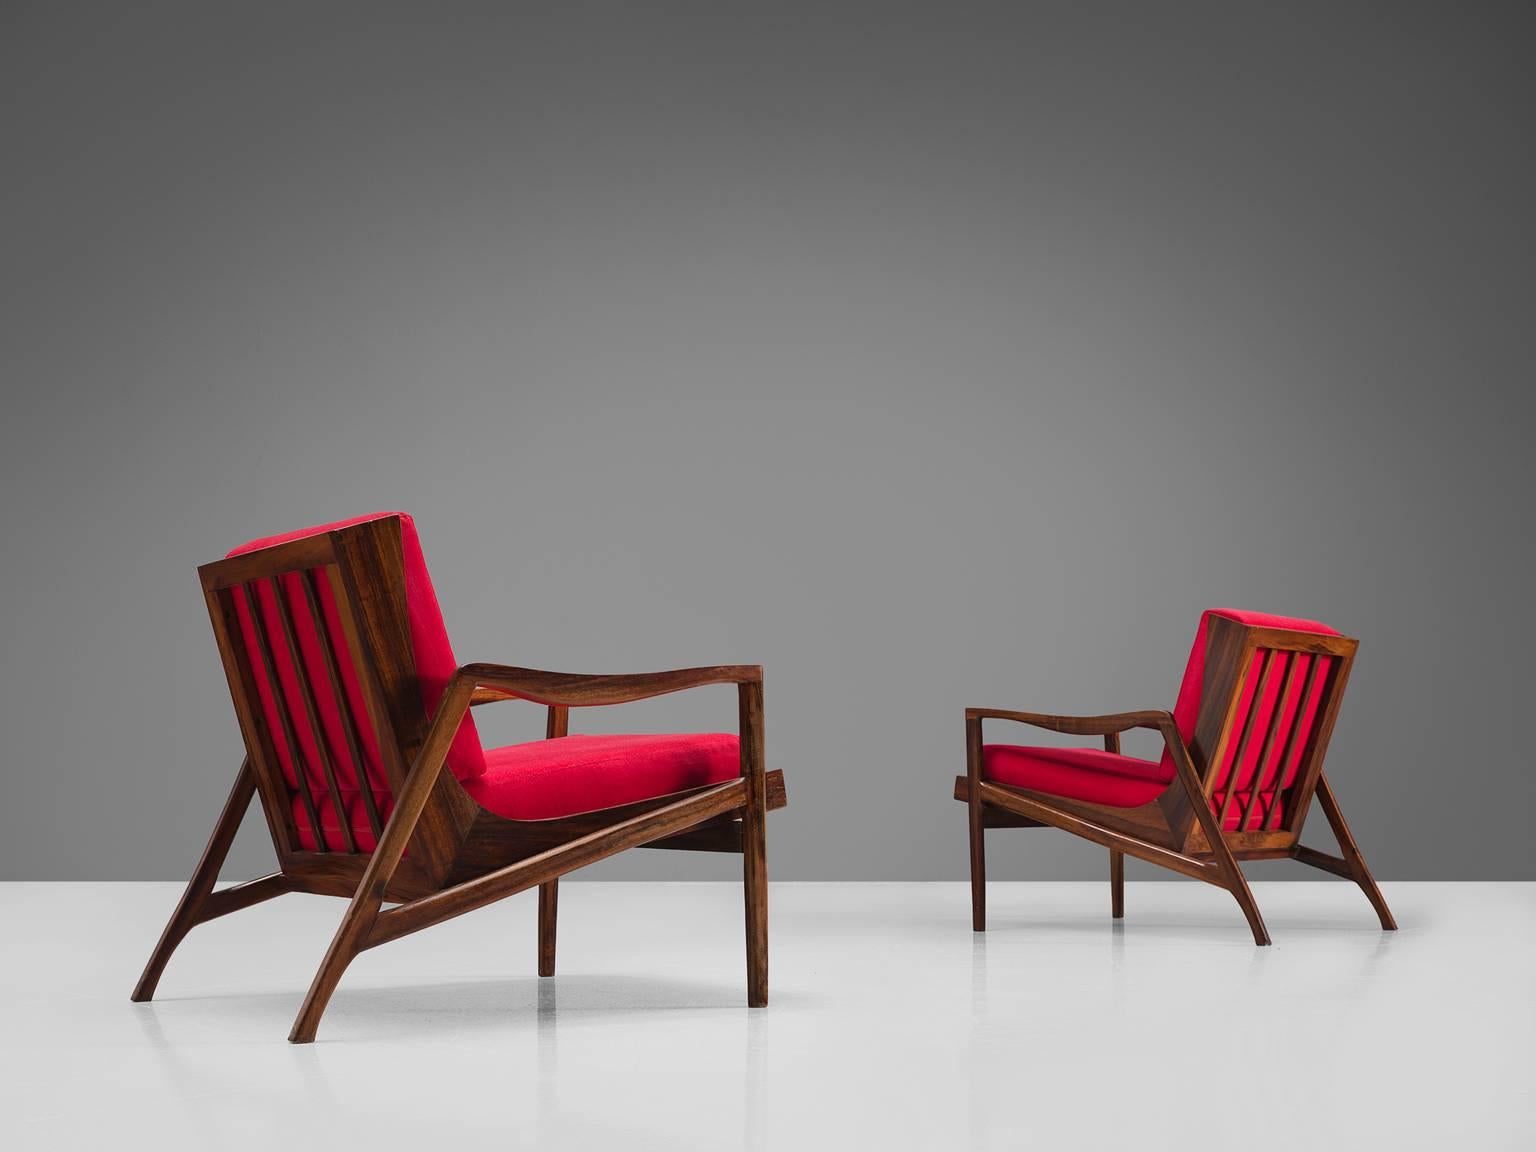 Liceu de Artes e Oficios, lounge chairs in red fabric and rosewood, Sao Paulo, Brazil, 1960s.

These sculptural Brazilian lounge chairs are made of solid dark stained wooden construction and feature a slatted back. The frame is delicate and robust